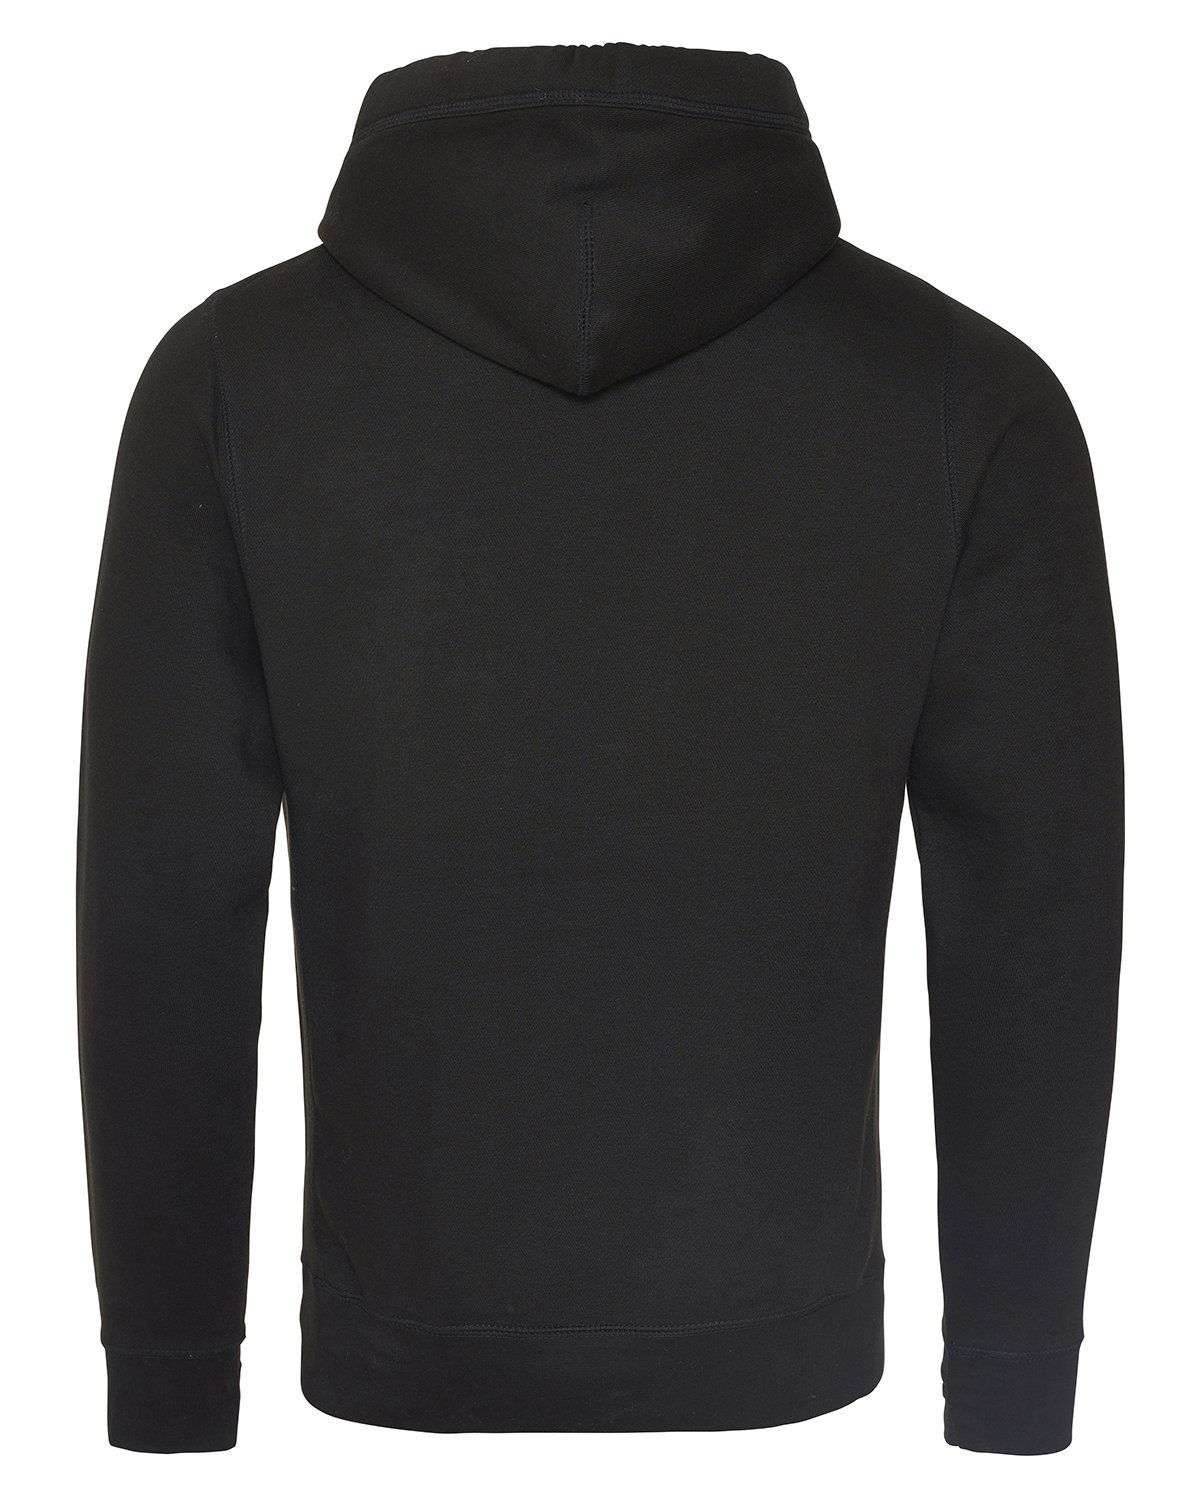 Just Hoods By AWDis Men's 80/20 Heavyweight Cross Over Neck Hooded ...